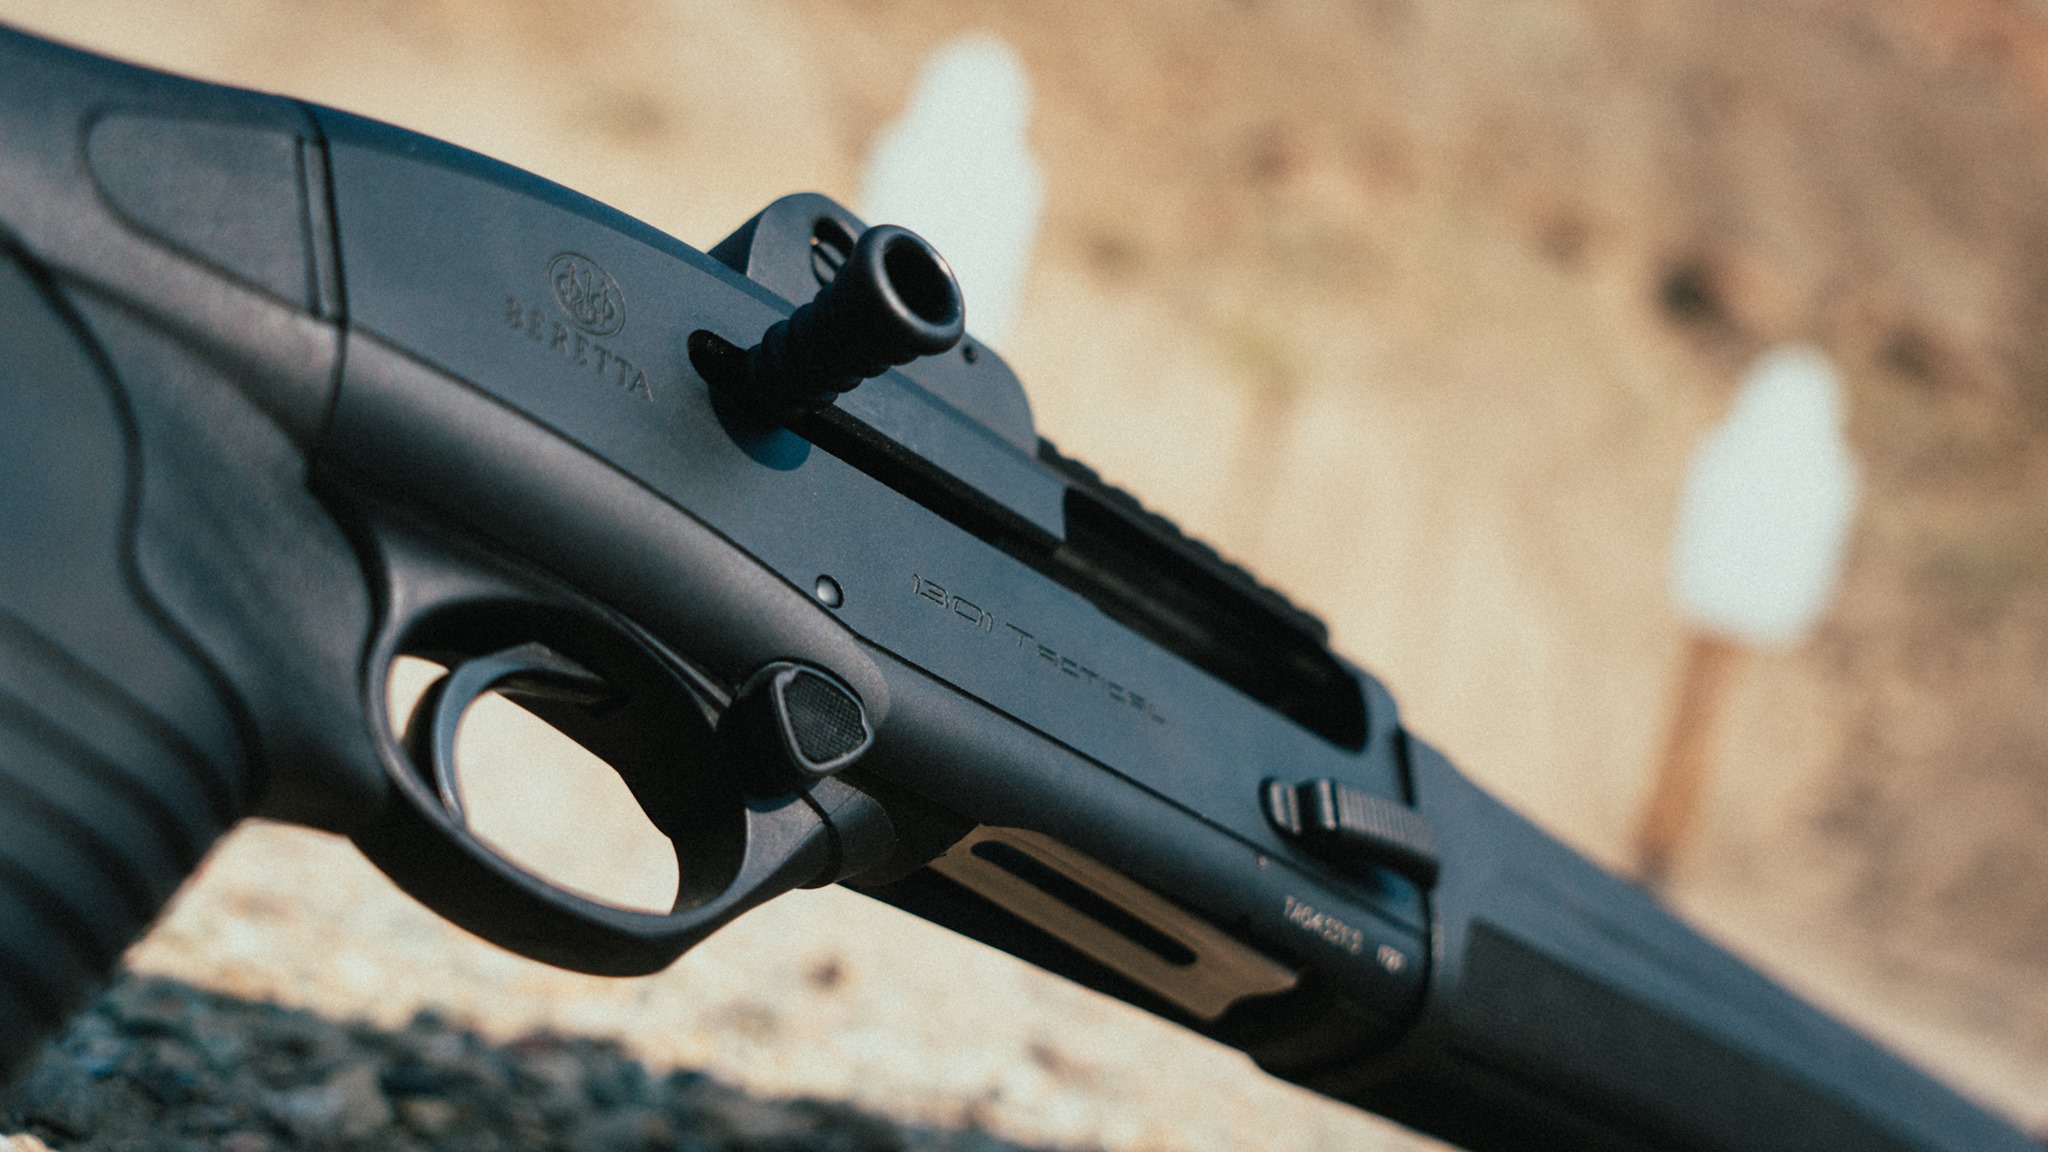 The Beretta 1301 Tactical is one of the best home defense shotguns.